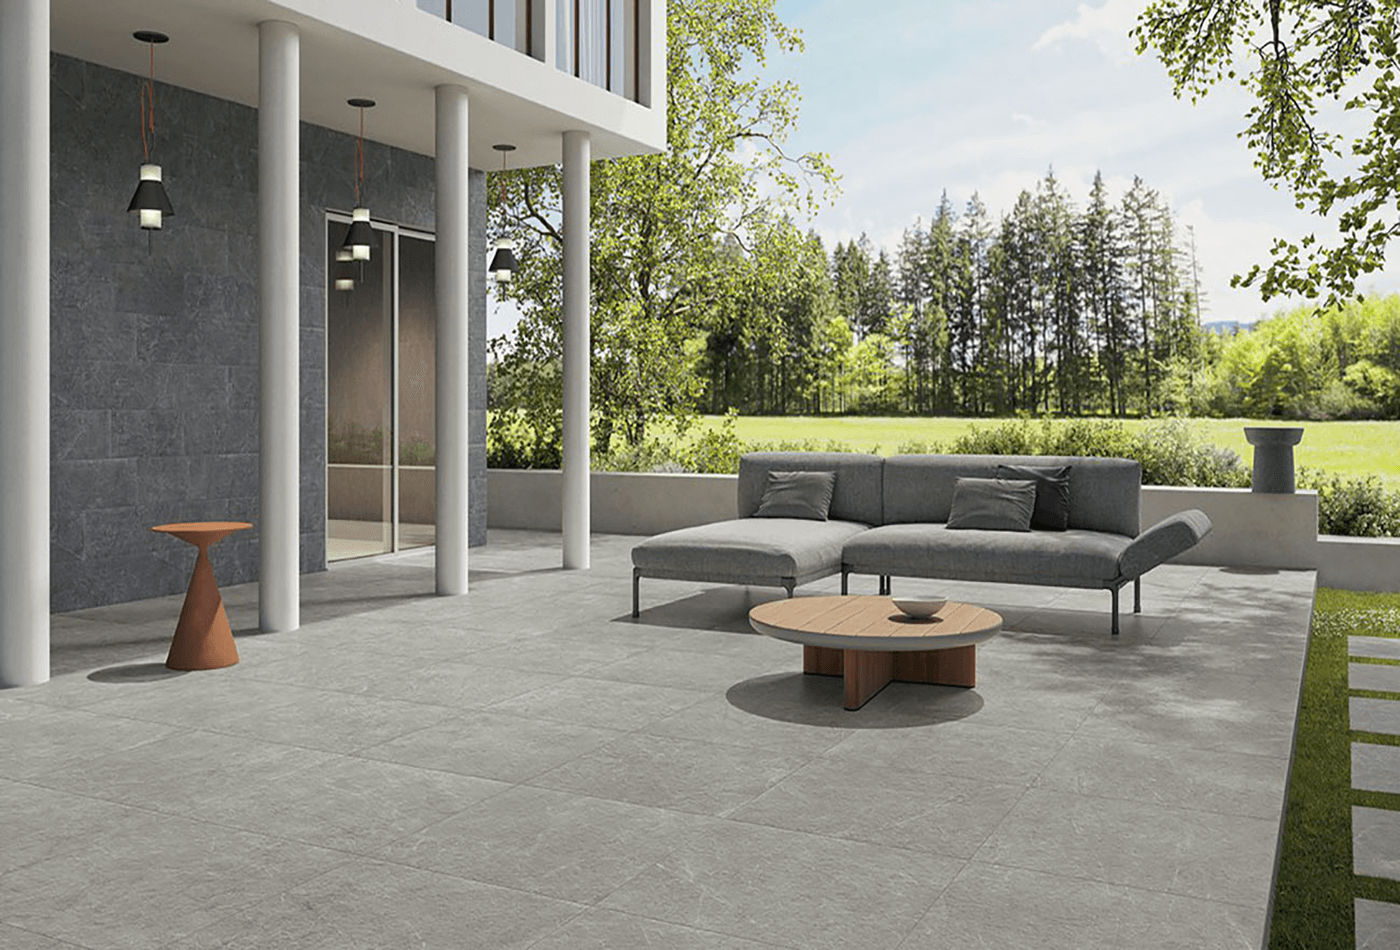 Quench the Pinnacle Outdoor Floor and Soak Up the Joy